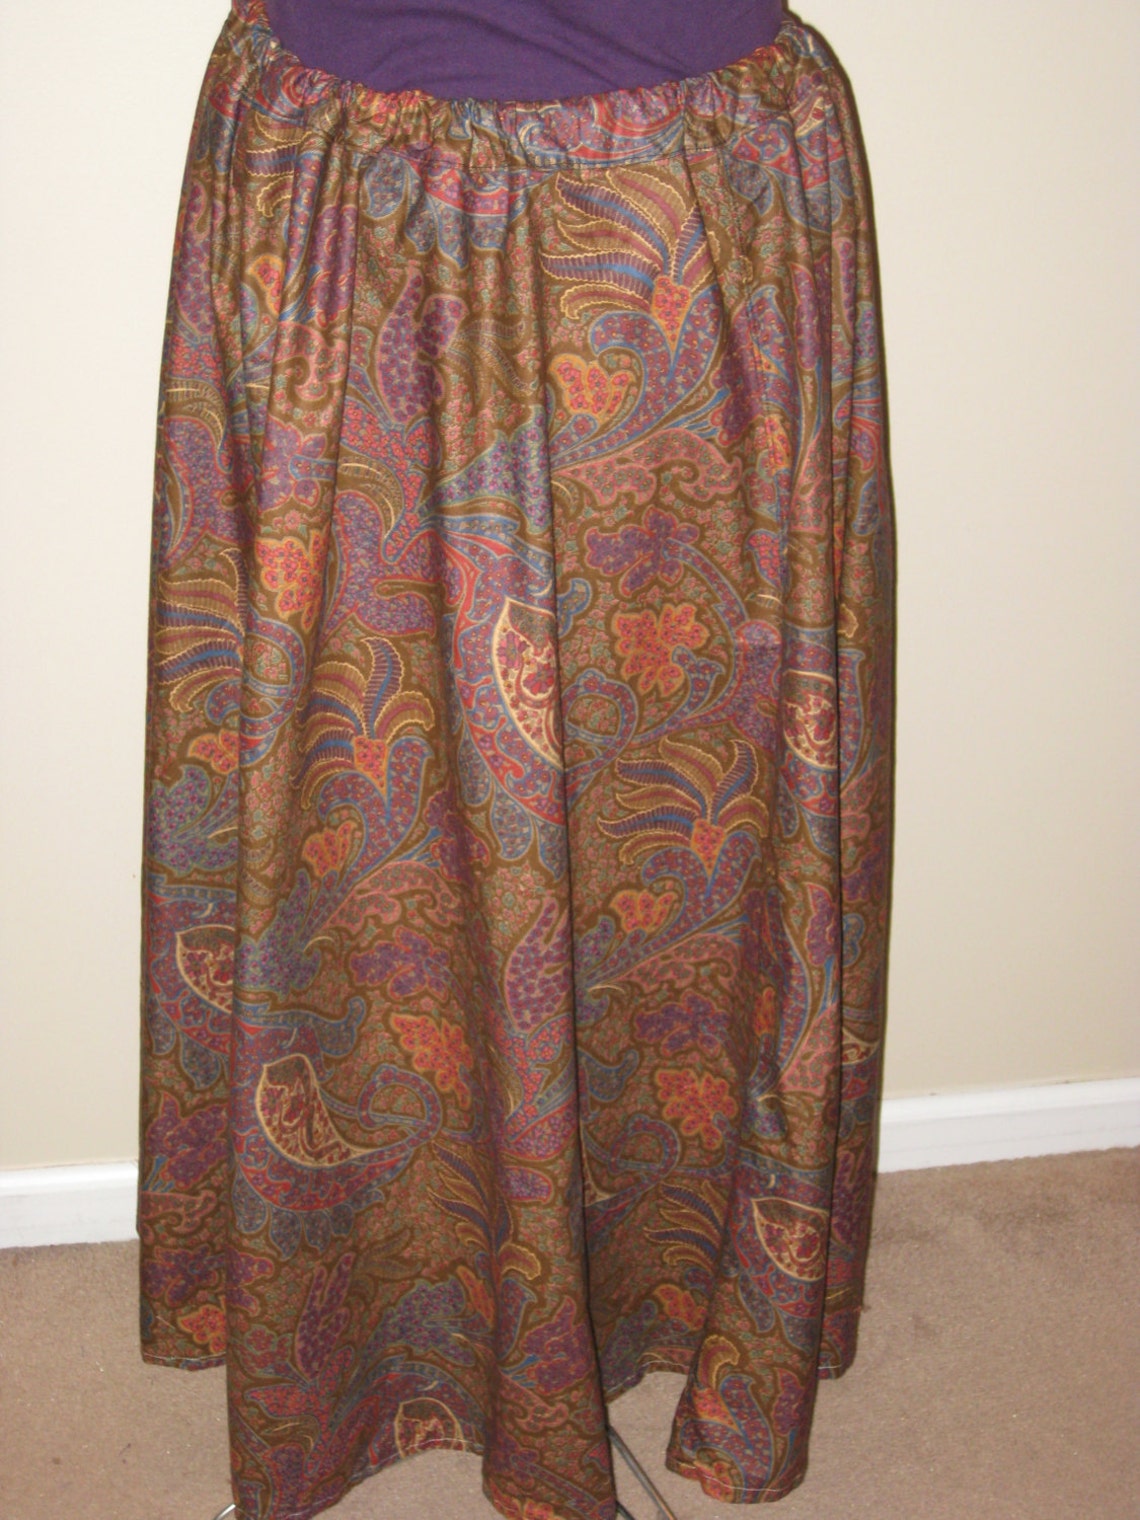 Long Paisley Maxi Skirt in Shades of Brown Burple and Teal - Etsy